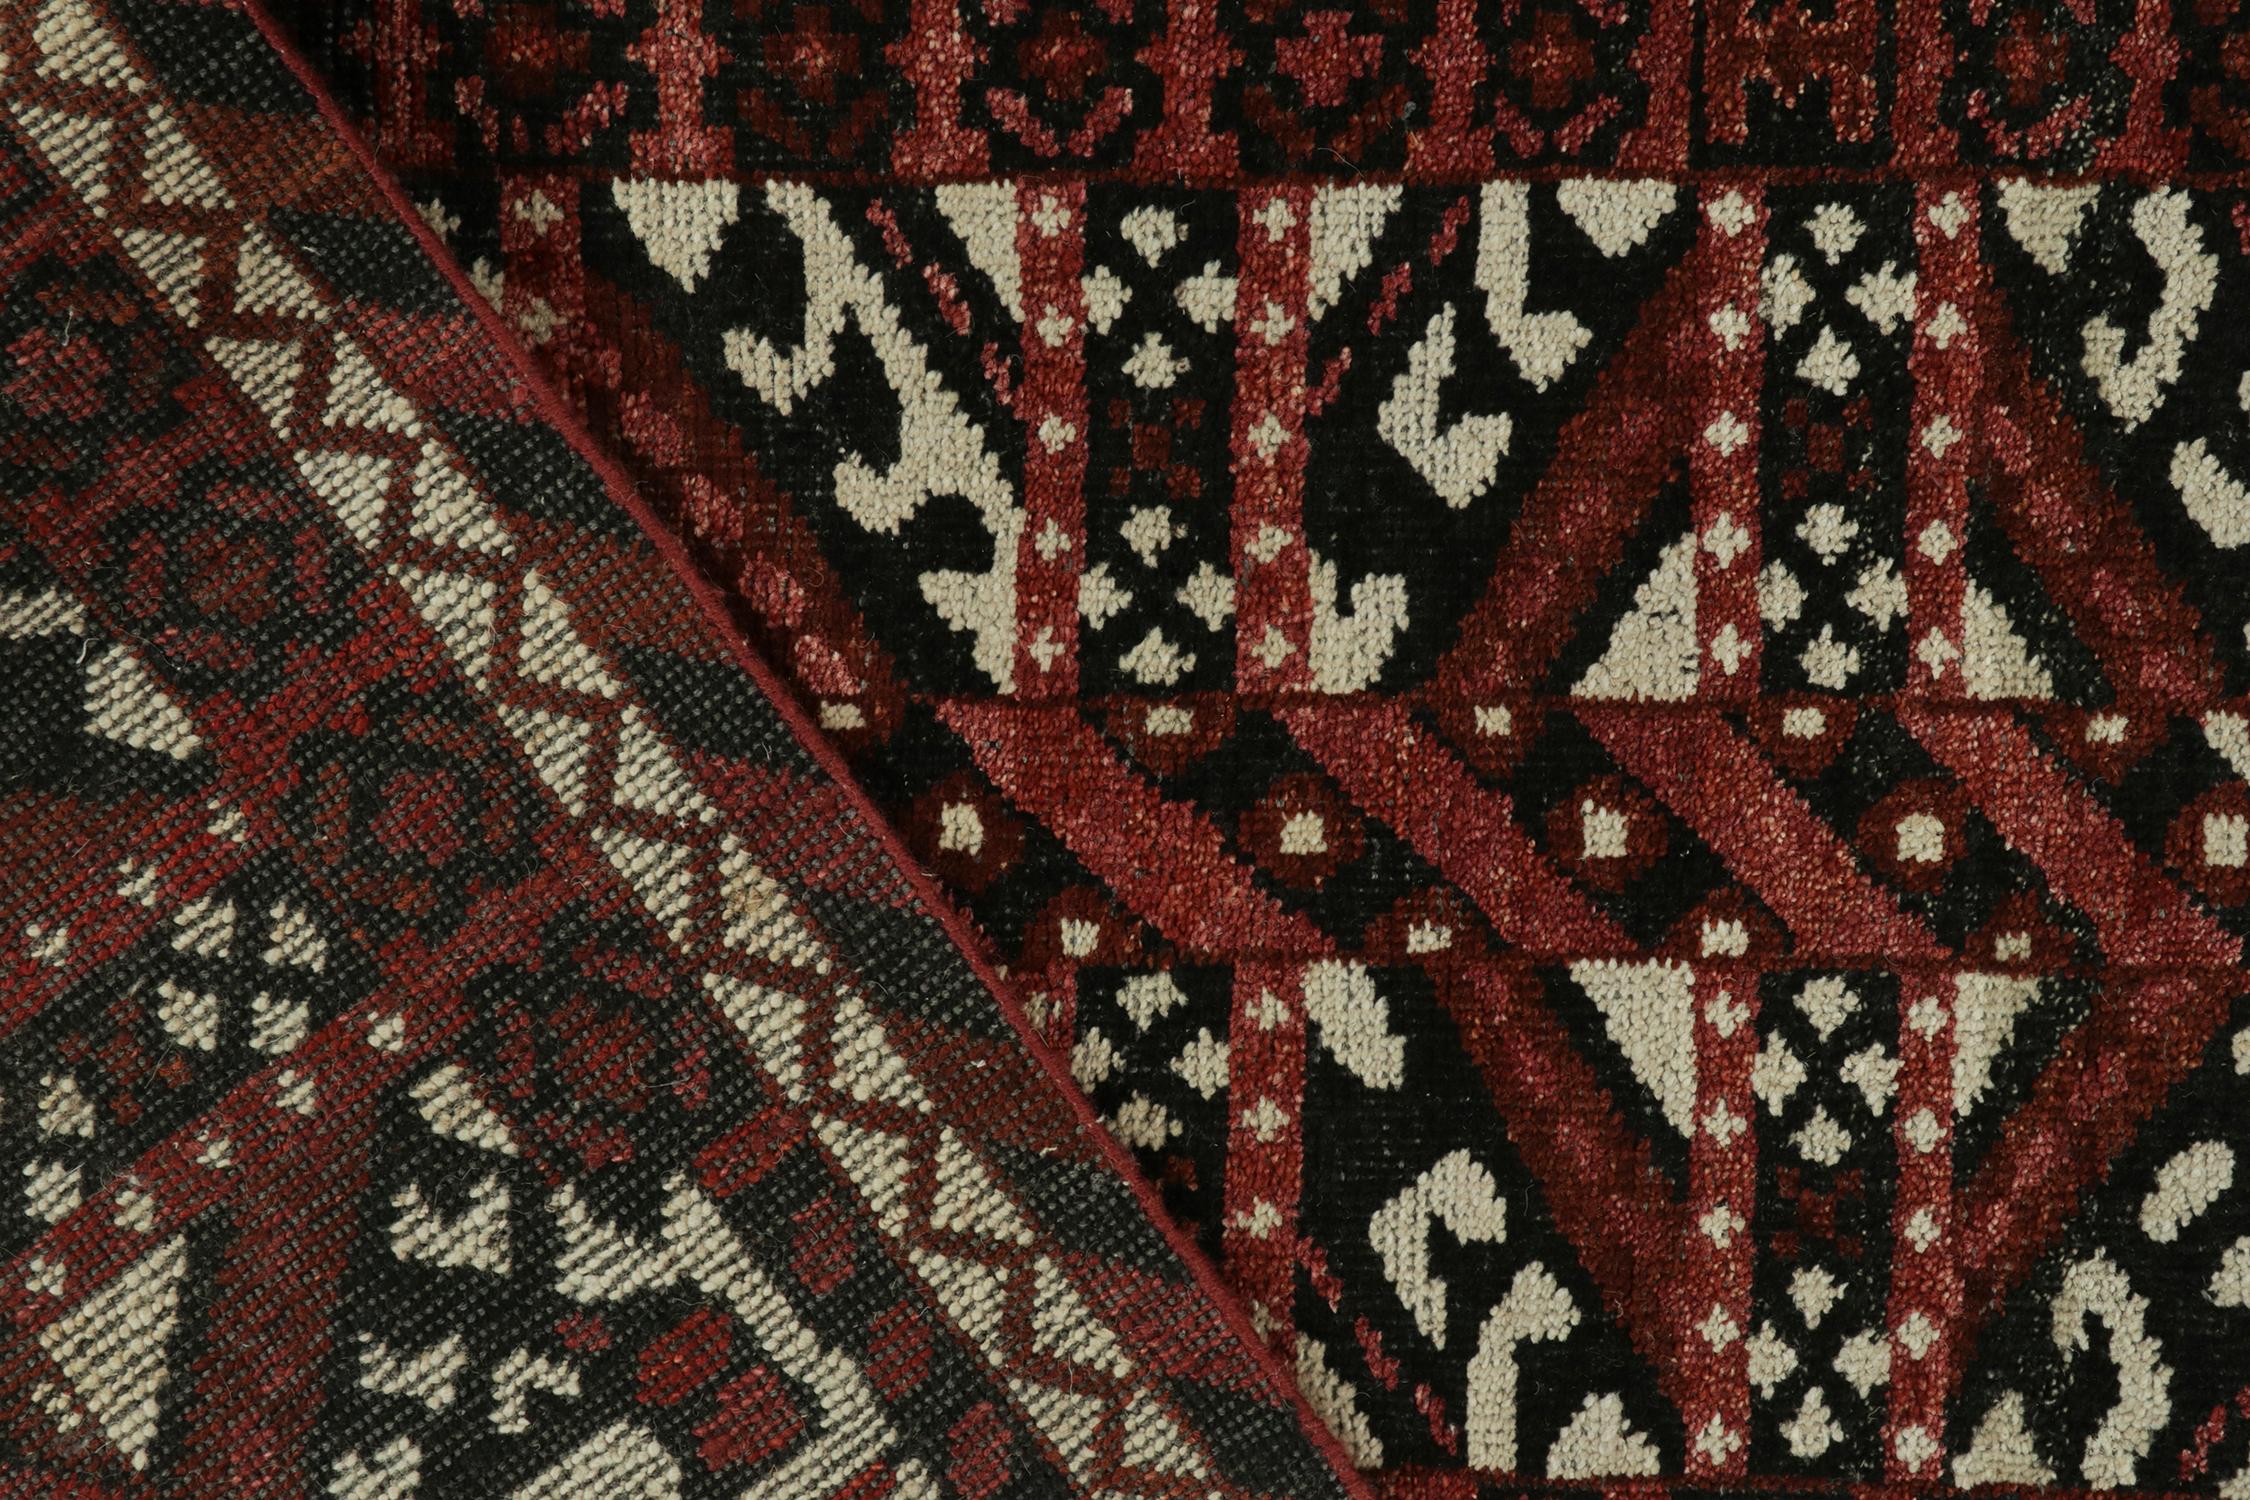 Wool Rug & Kilim’s Tribal style runner in red, black and white geometric pattern For Sale